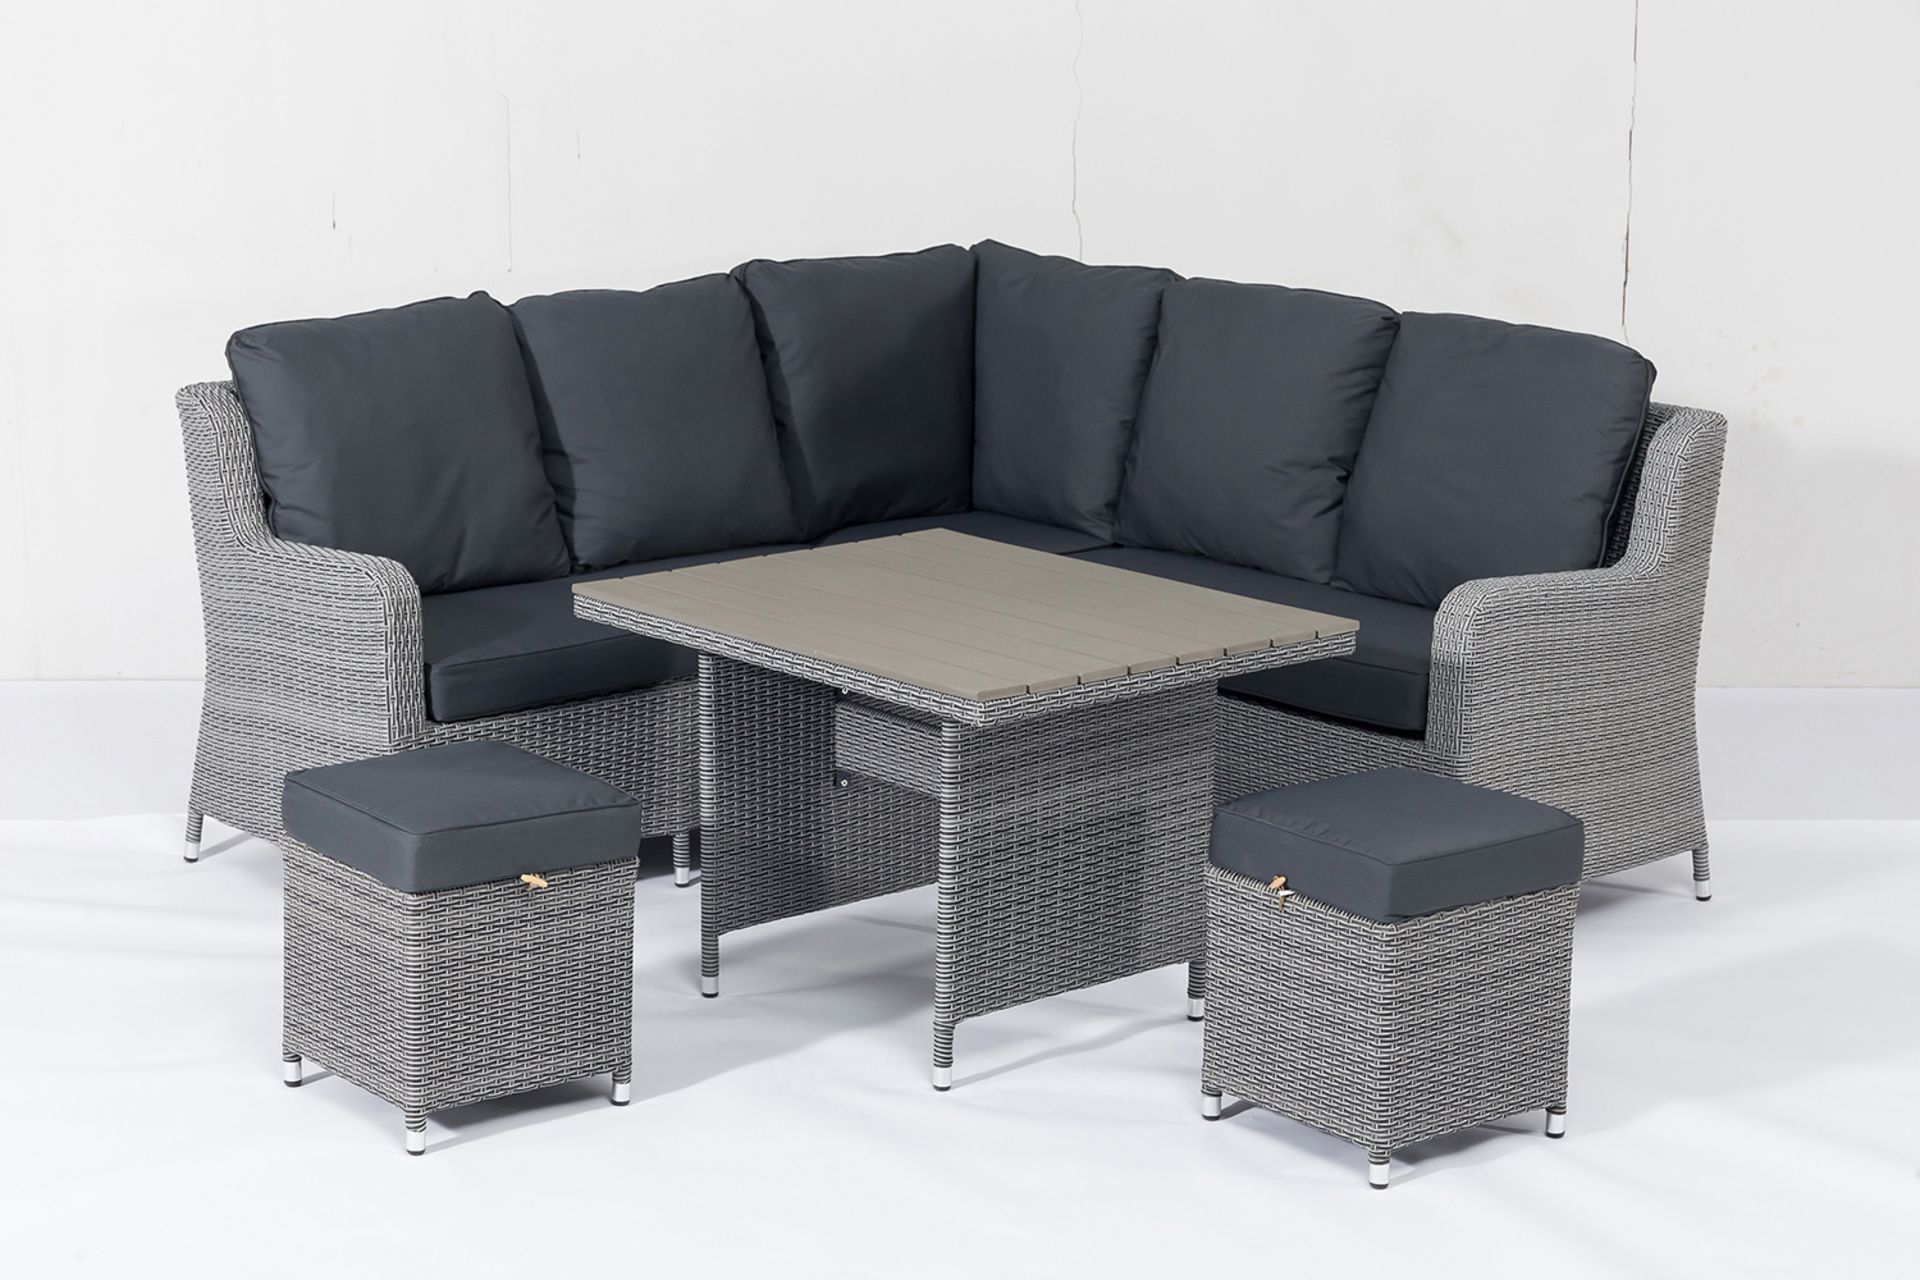 Rattan Outdoor Cambridge Corner Dining Set With Polywood Top (Grey) *BRAND NEW* RRP £1099 - Image 2 of 4